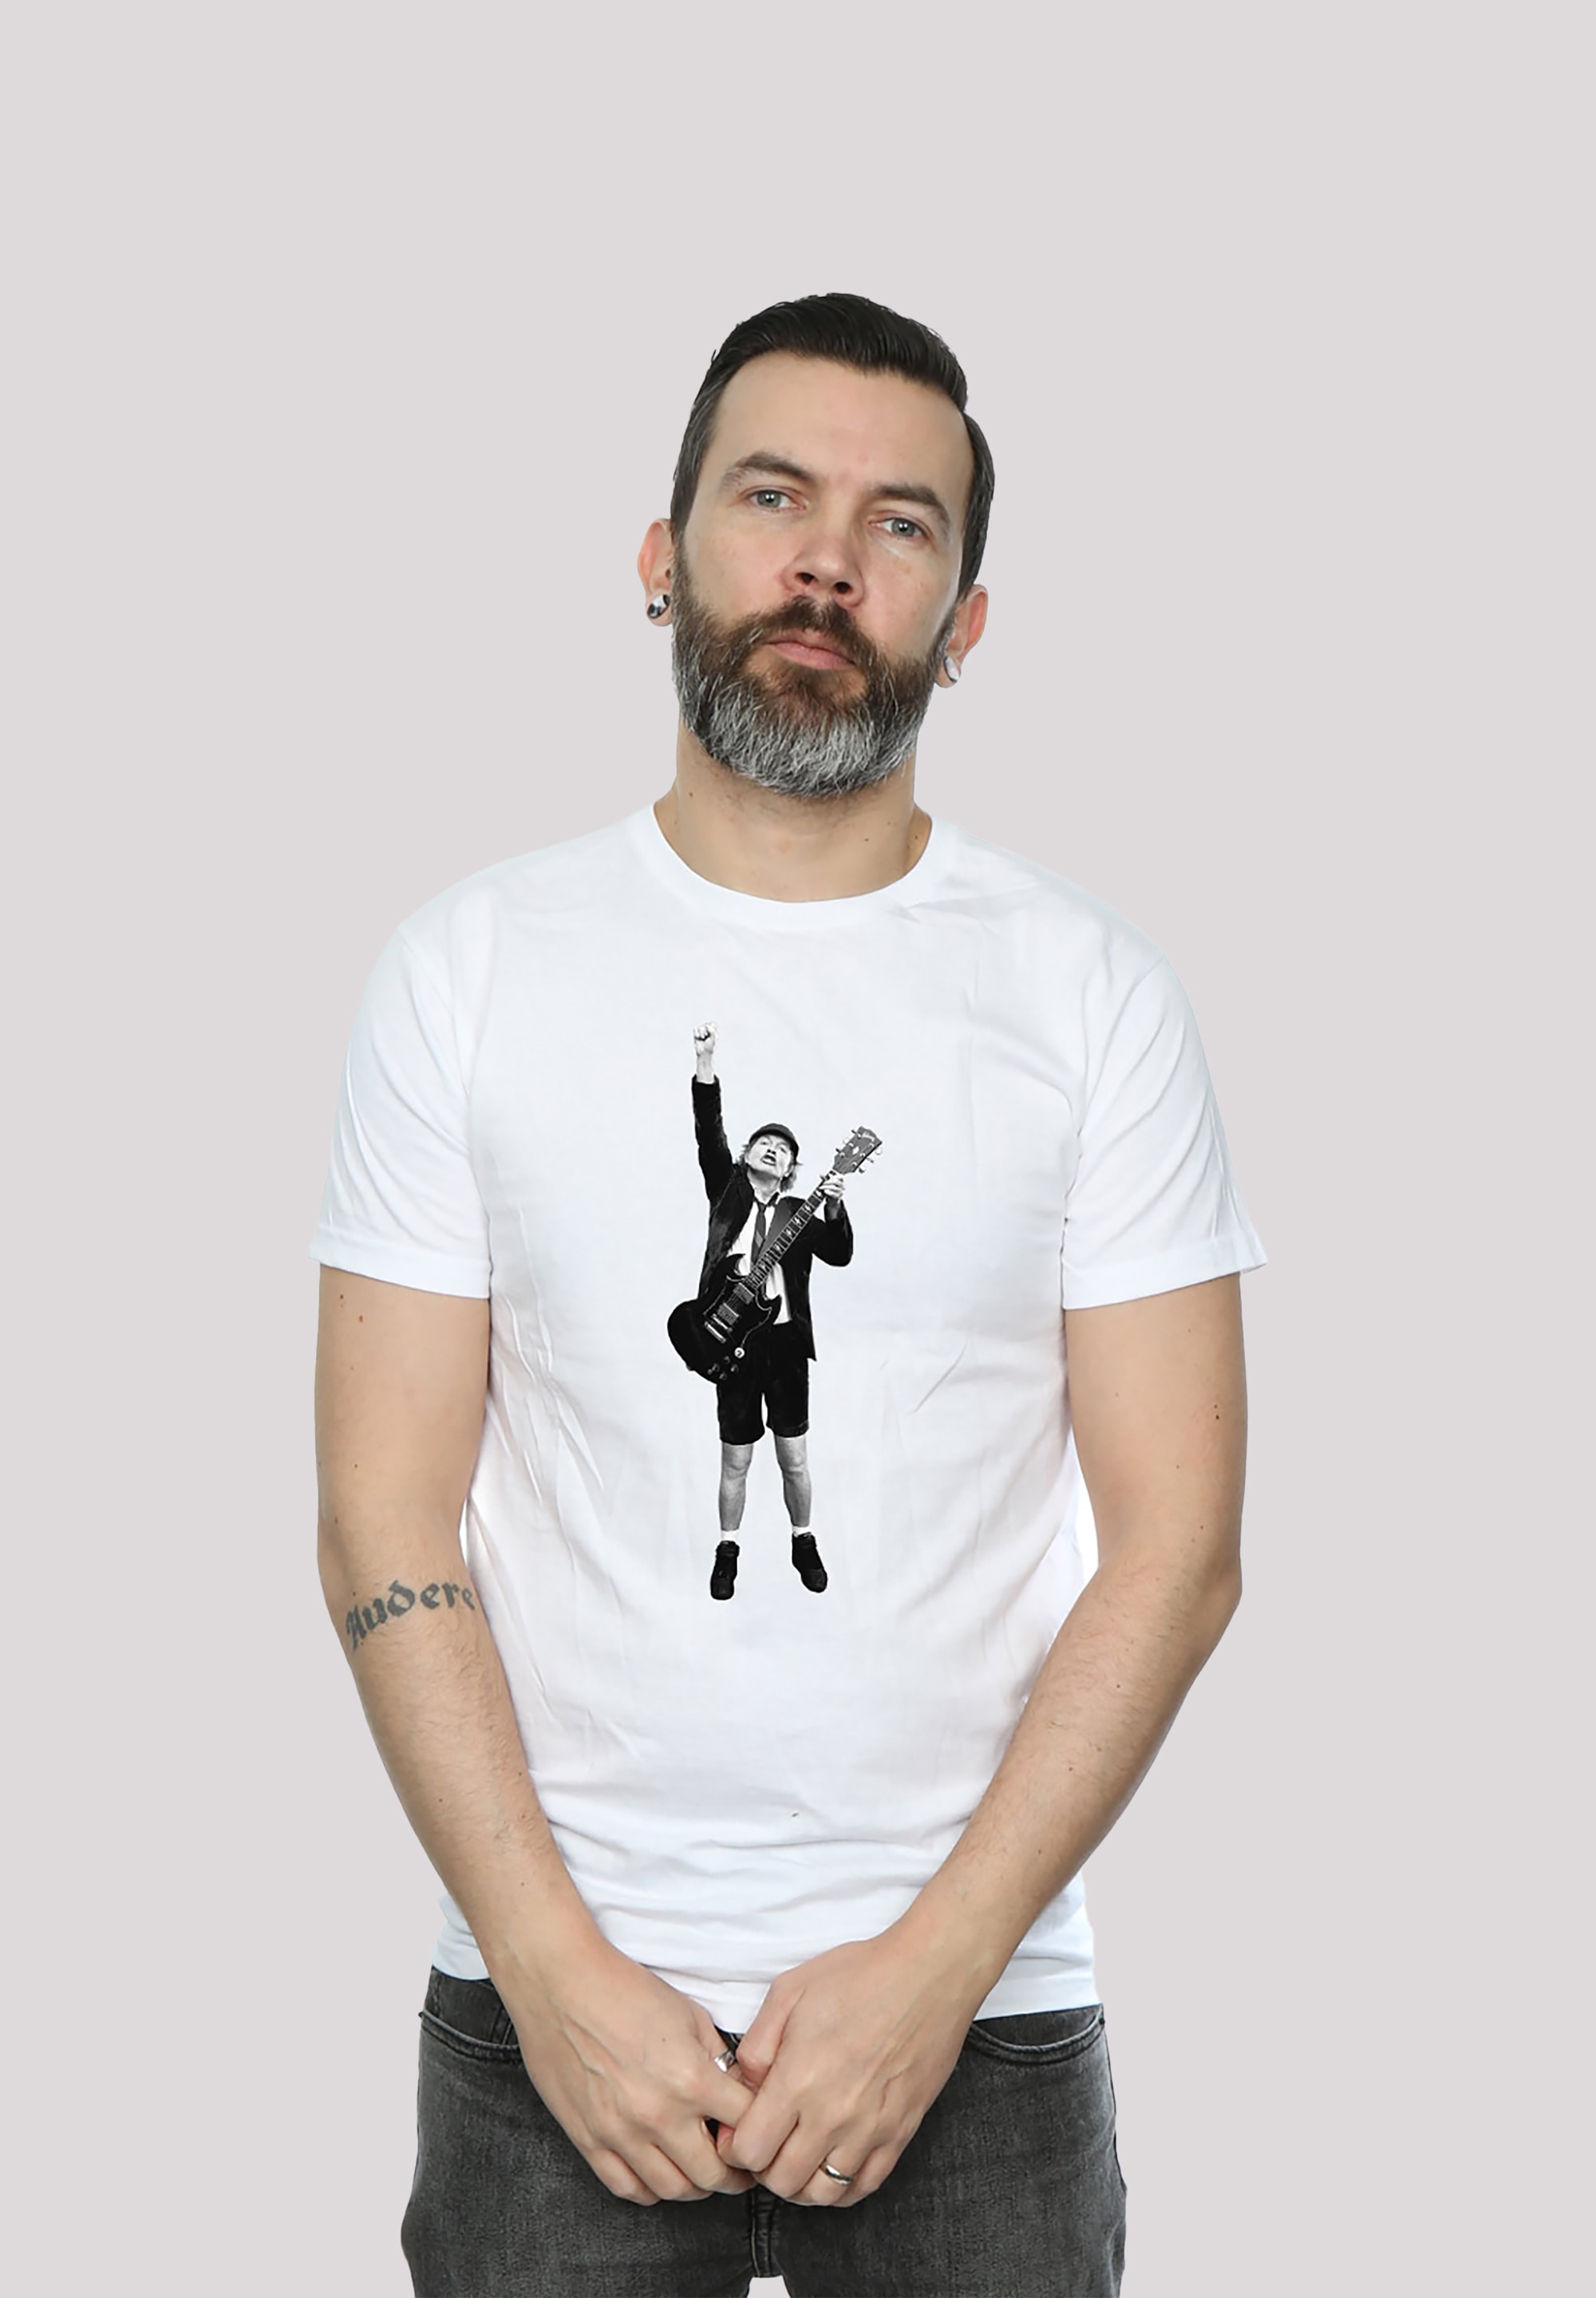 T-Shirt »ACDC Angus Young Cut Out für Kinder & Herren«, Print